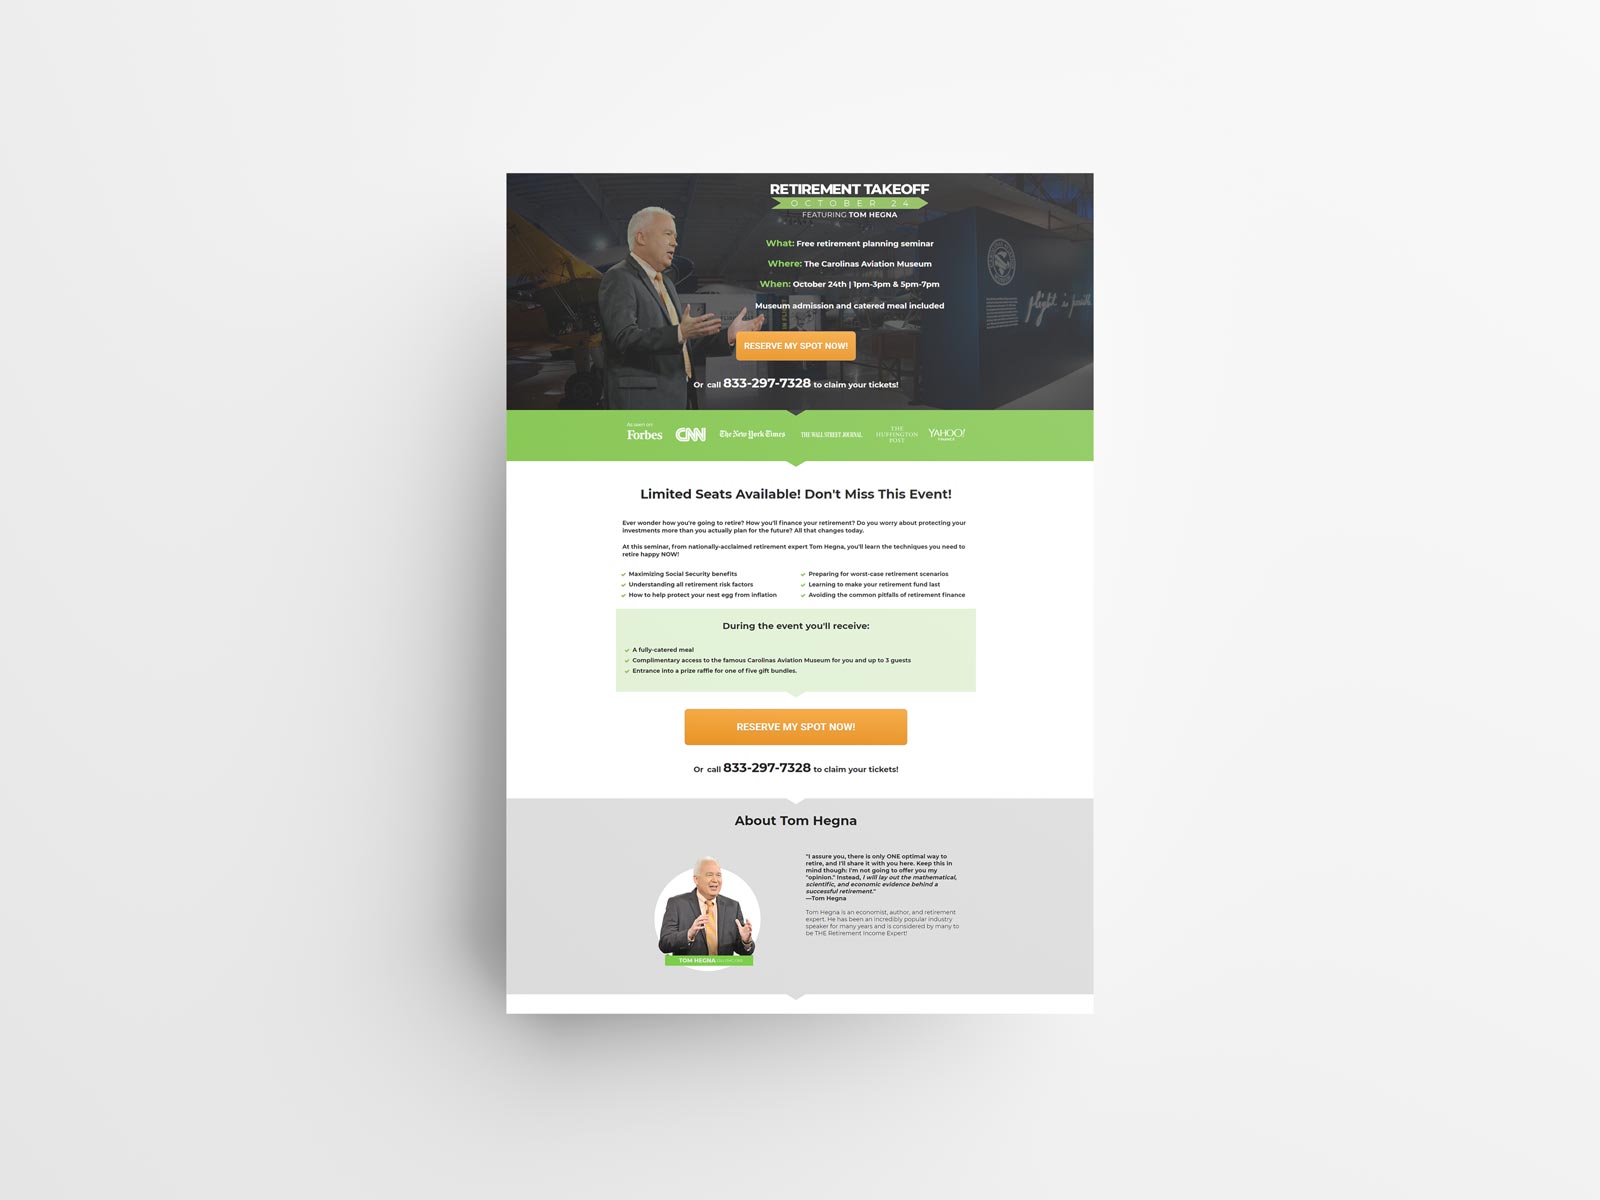 Landing page created for speaking event